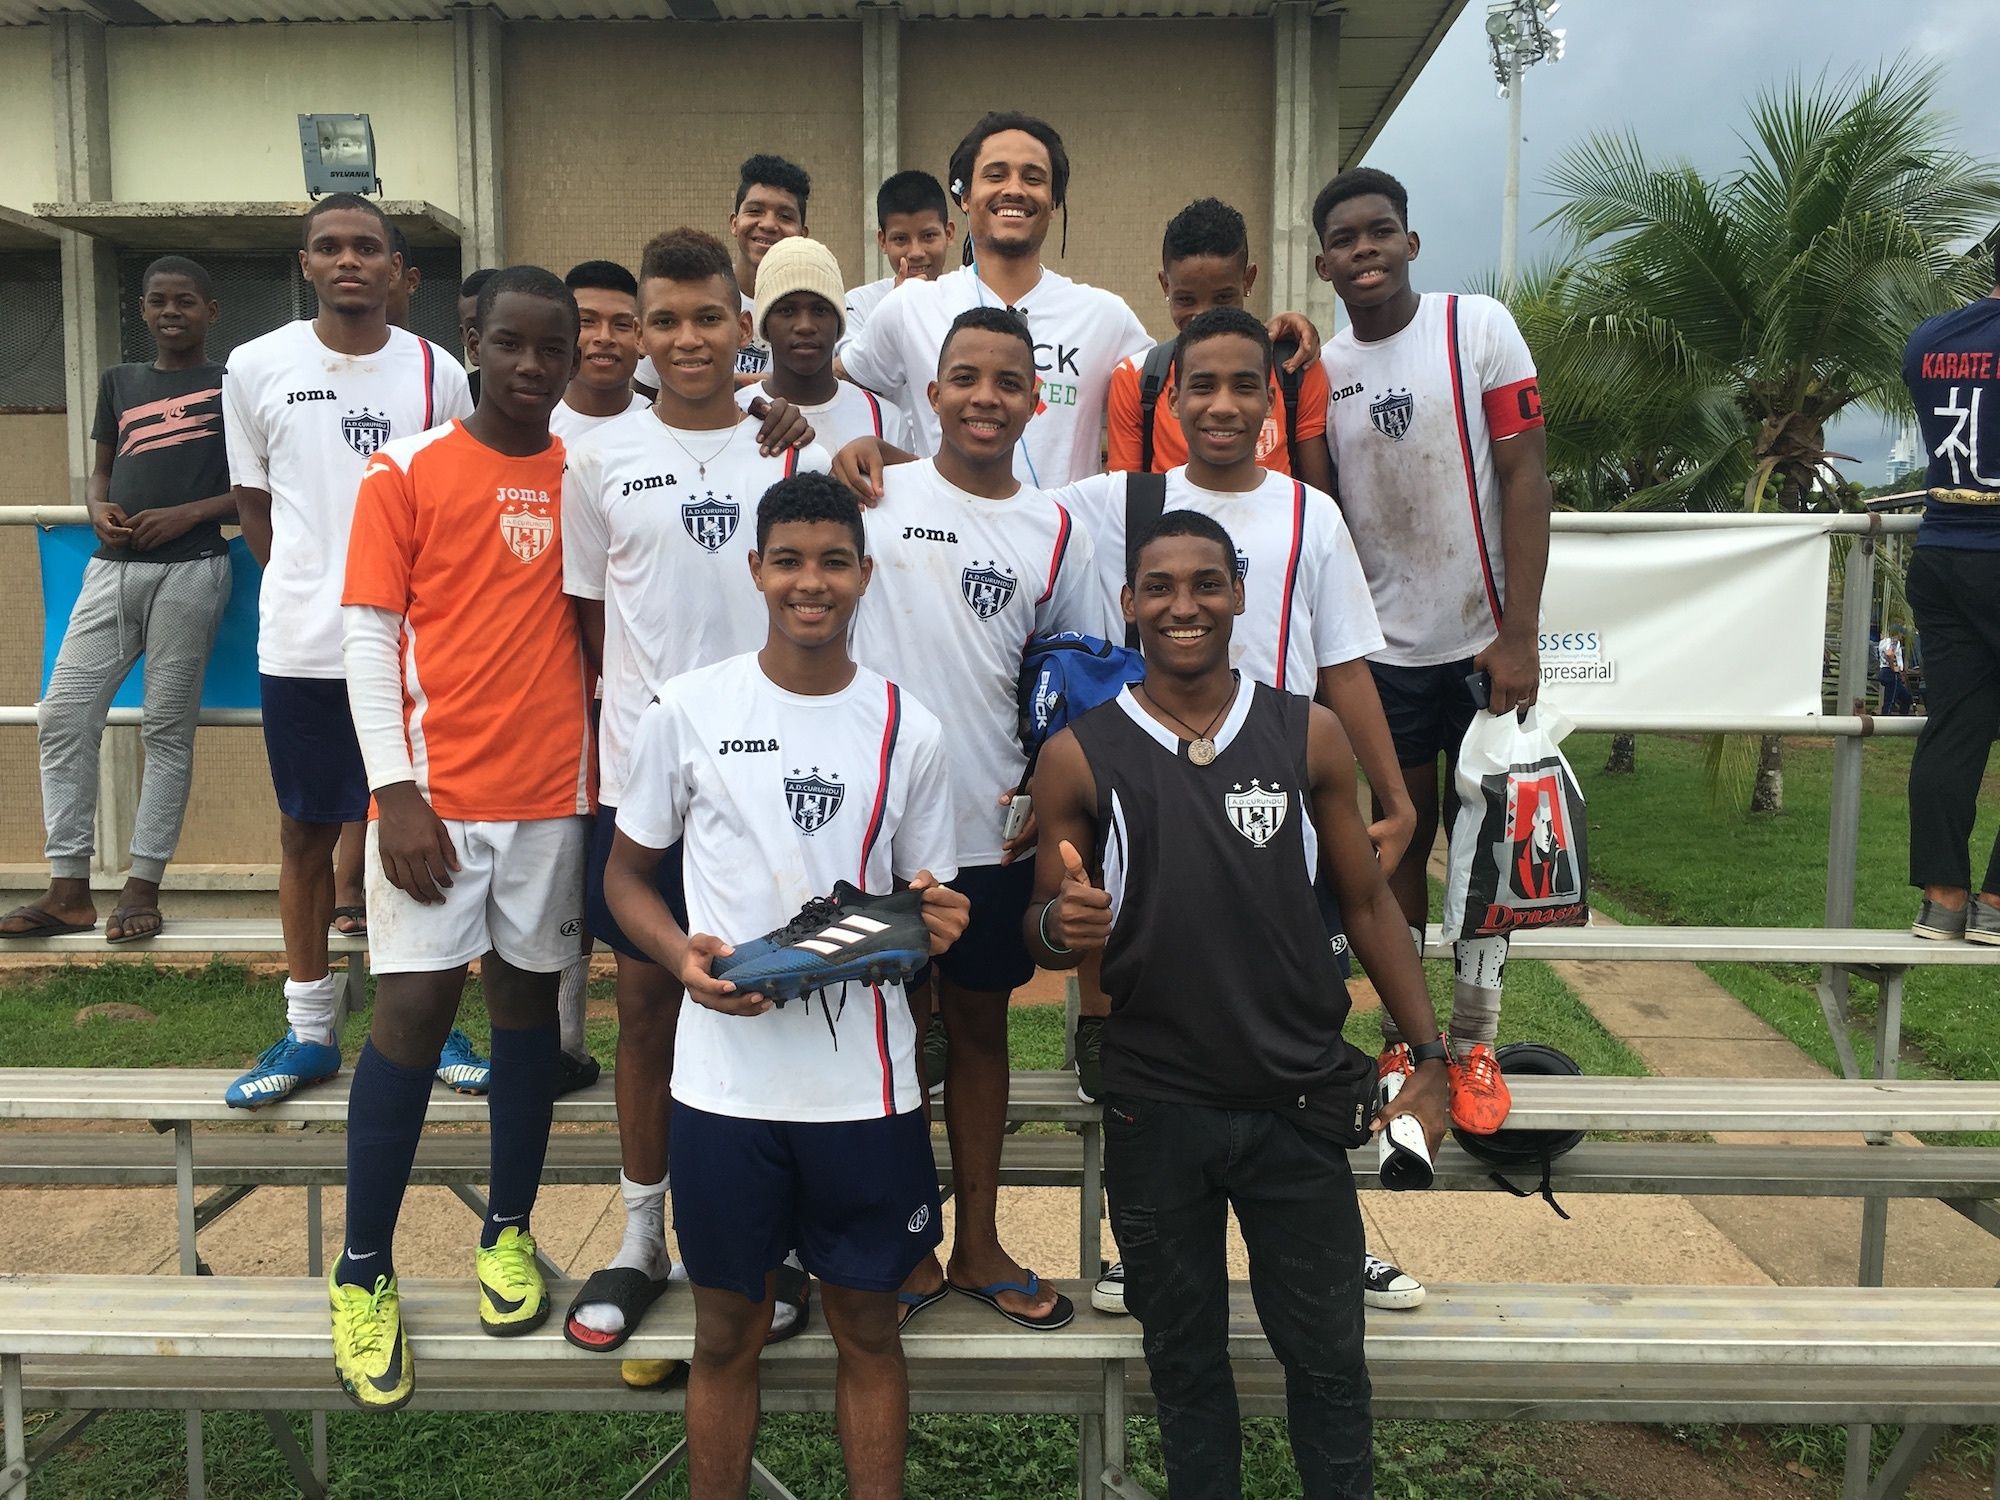 In Panama, a Youth Soccer Group Leads the Charge Against Racism & Economic Impacts of COVID-19